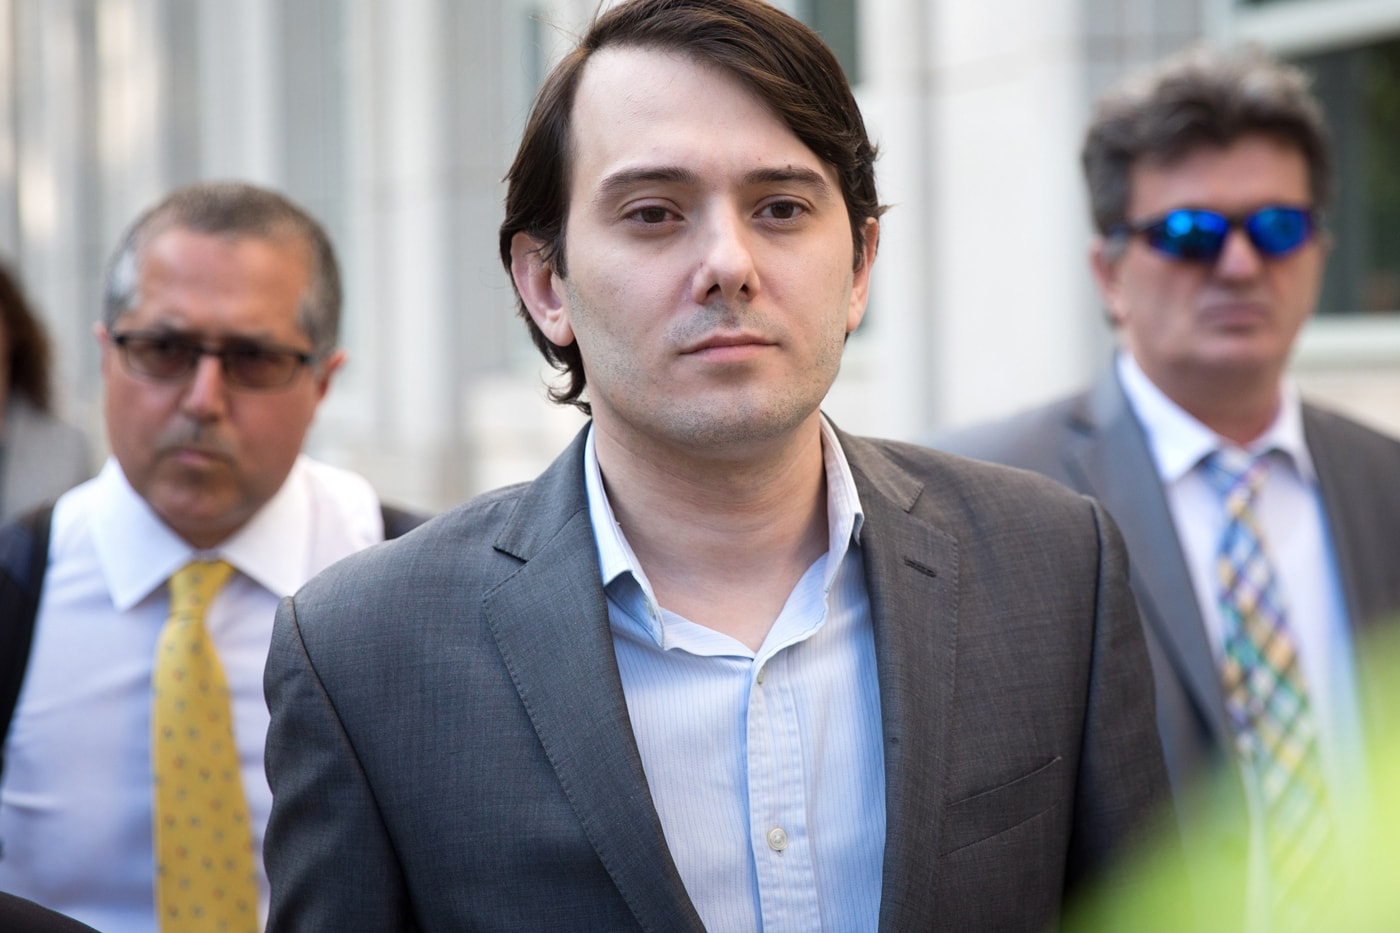 Martin Shkreli Wu-Tang Clan Album Interview once upon a time in shaolin 2 million District Court for the Eastern District of New York August 4 2017 conviction jury brooklyn